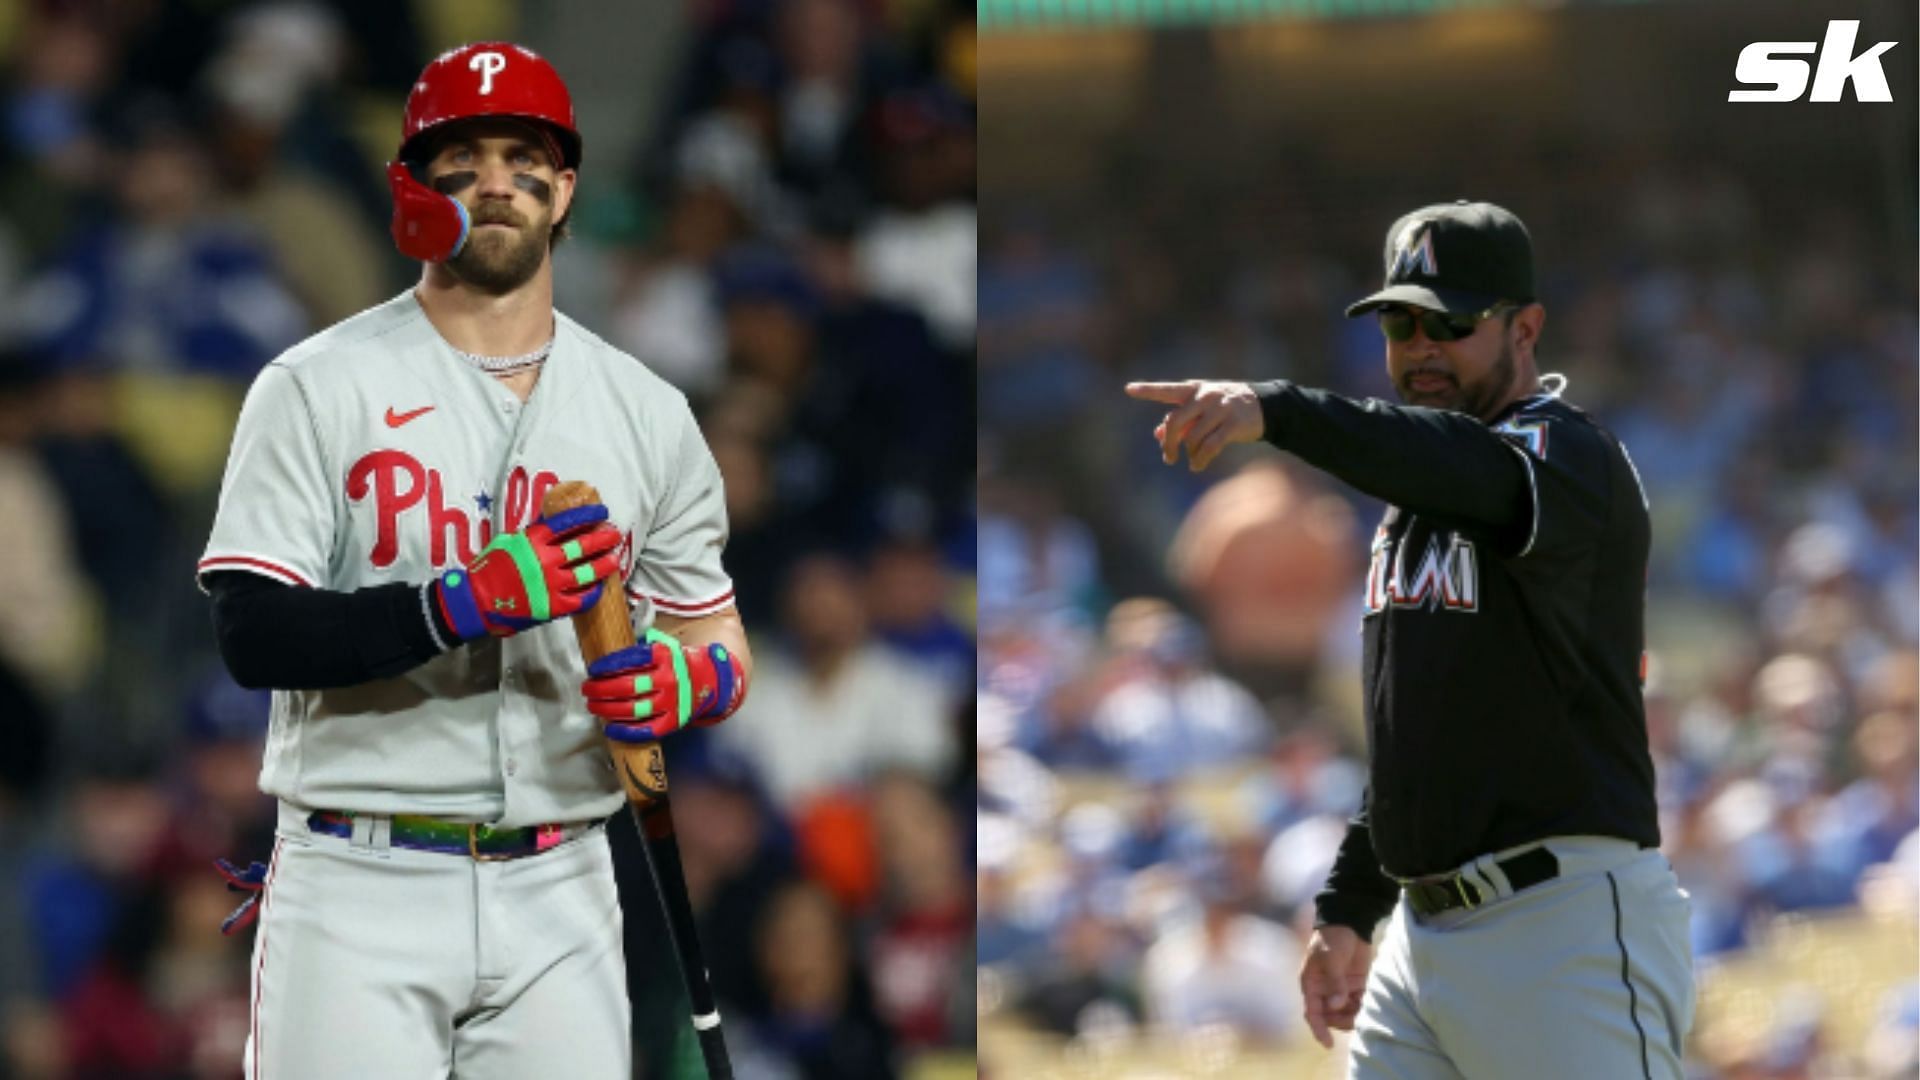 When former Marlins manager Ozzie Guillen took aim at Phillies star Bryce  Harper's pine tar bat claiming foul play